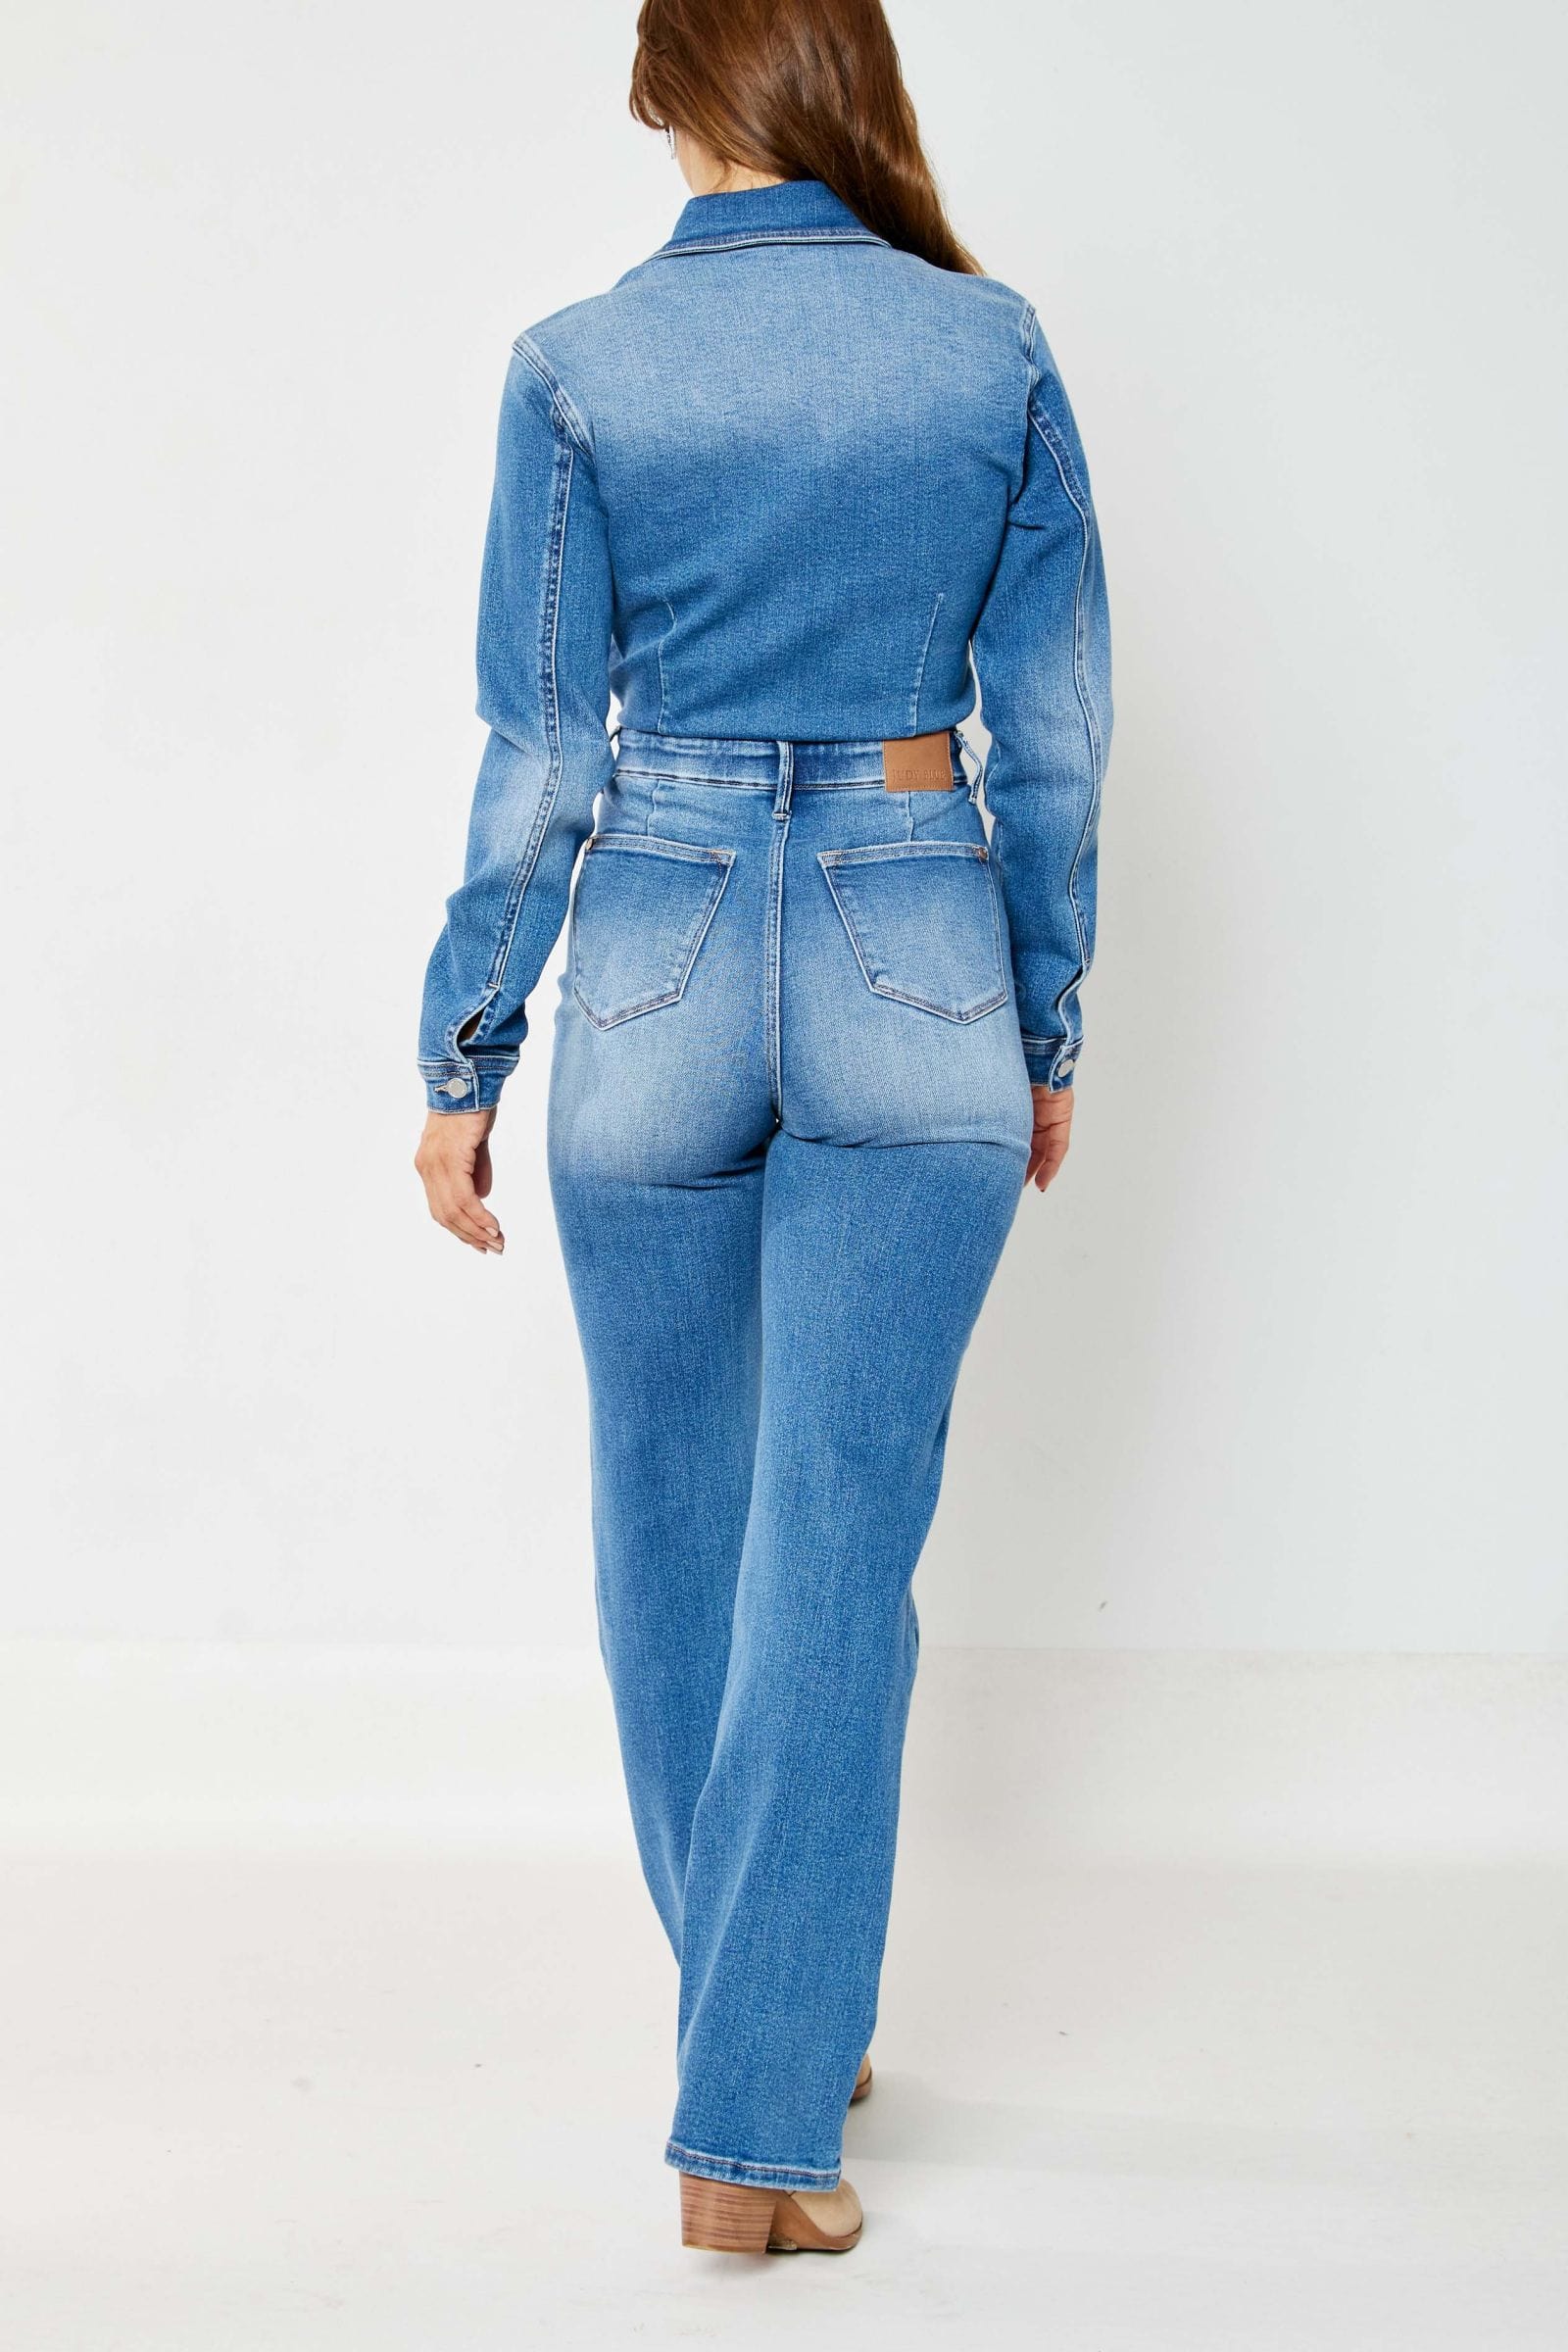 Stylish New Women Buttons Long Sleeves Patchwork Casual Long Denim Jumpsuit  | eBay